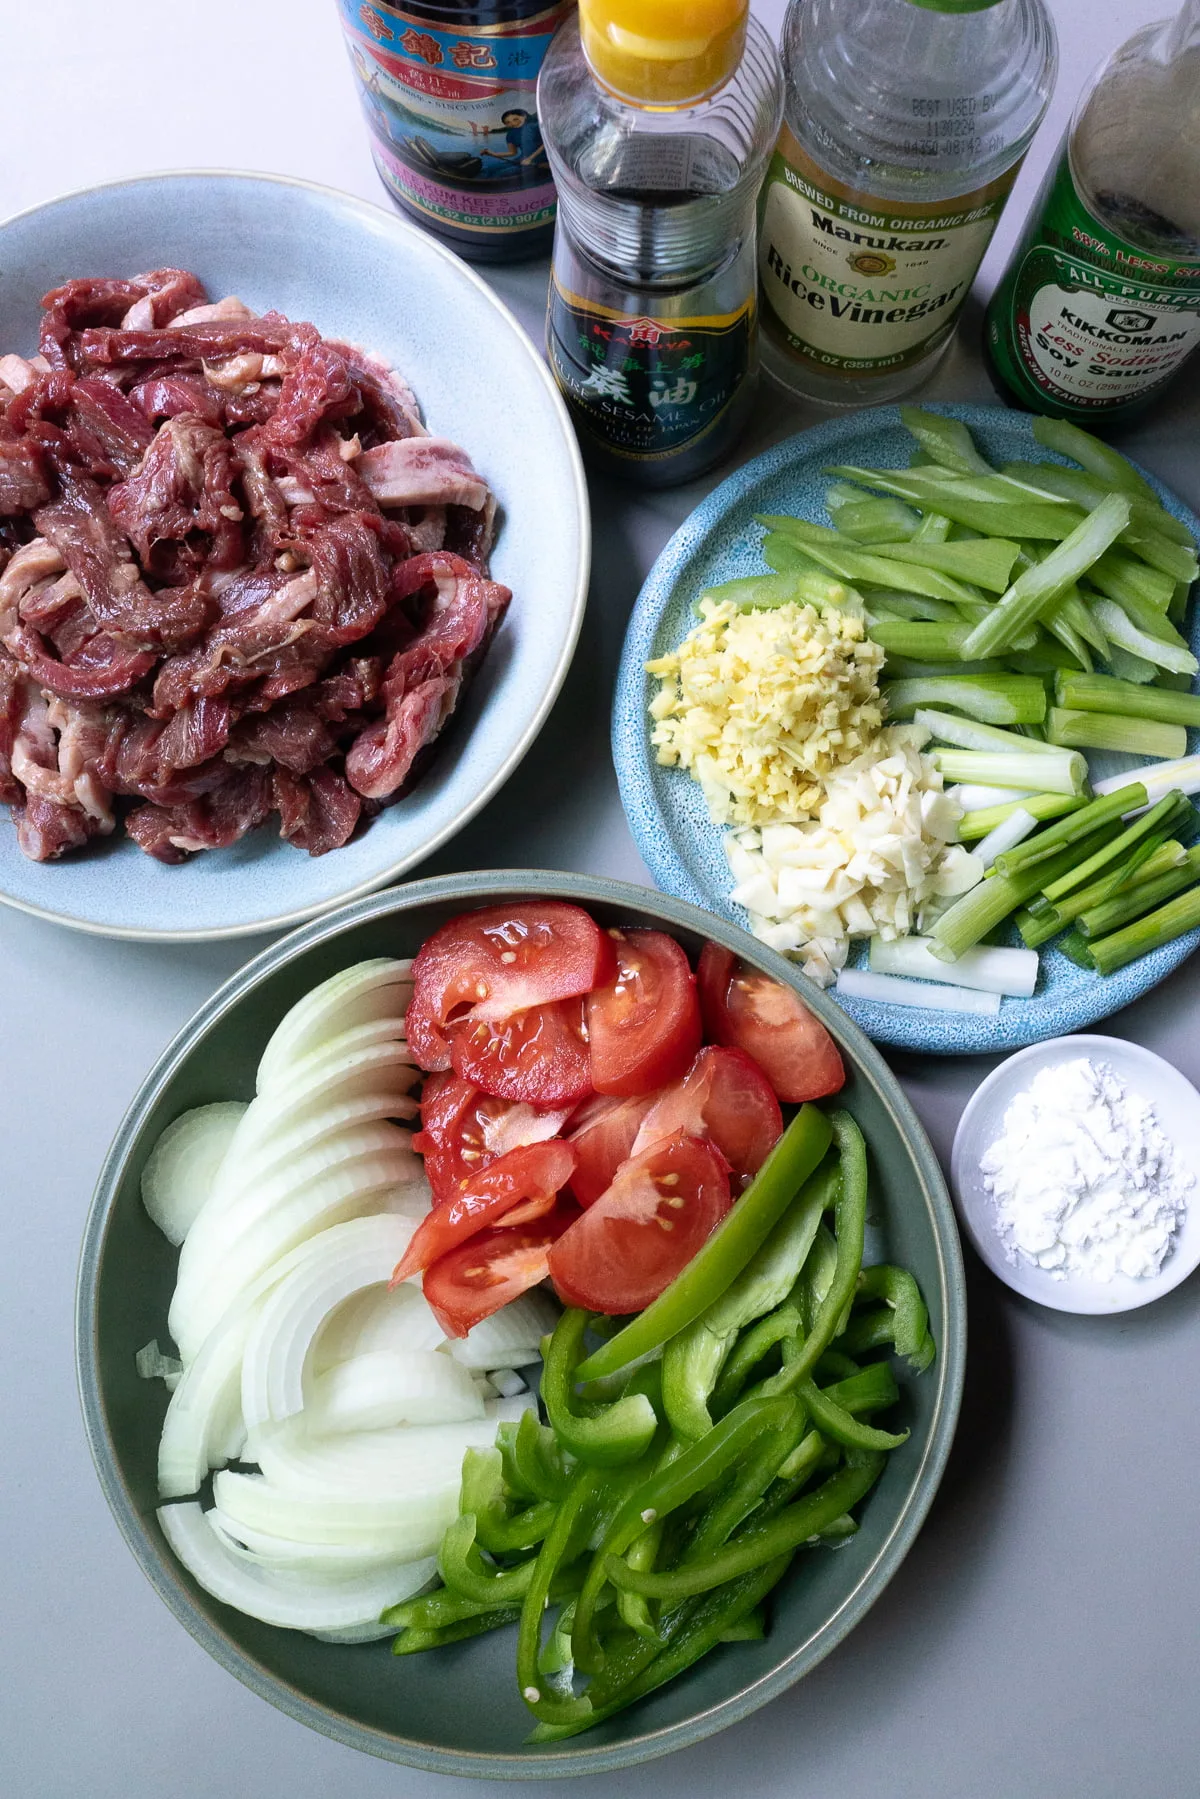 Ingredients for Beef Tomato, laid out on a table (beef, tomato, onions, celery, bell peppers, green onions, ginger, garlic, cornstarch, soy sauce, oyster sauce, rice vinegar, and sesame oil).